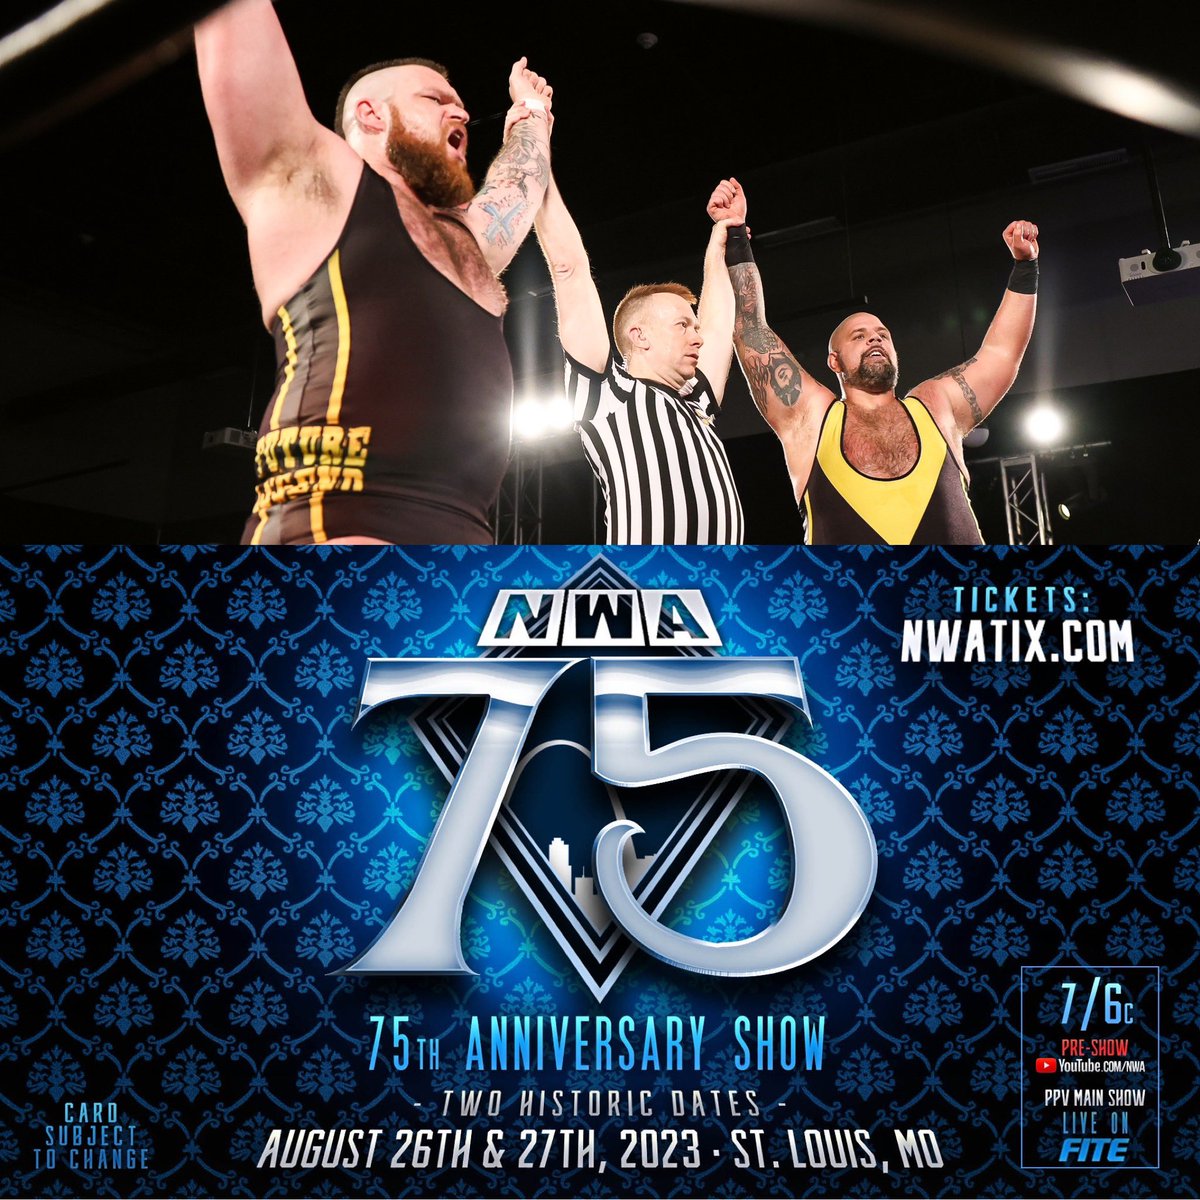 The Fixers are headed to NWA 75!
-Tickets at nwatix.com
-Stream on Fite! 

#NWA #NWAPowerrr #NWAUSA #NWAWrestling #CrockettCup #NWA75 #PowerrrTrip #NWAPowerrrTrip #NationalWrestlingAlliance #EMPOWERRR #PowerrrSurge